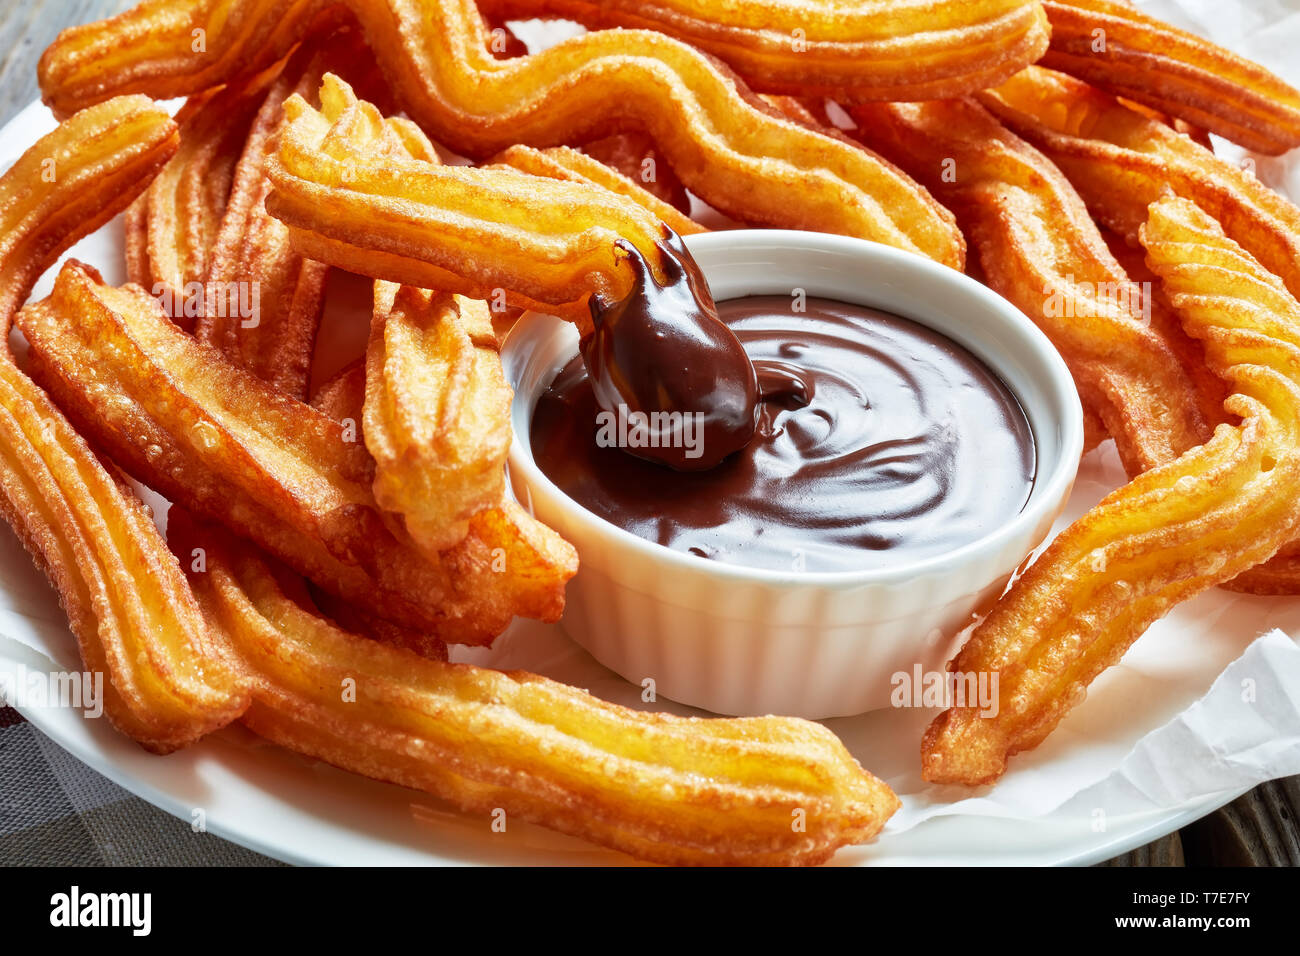 delicious deep fried churros served with chocolate dipping on a white plate on a wooden table with napkin, Traditional spanish and mexican street food Stock Photo